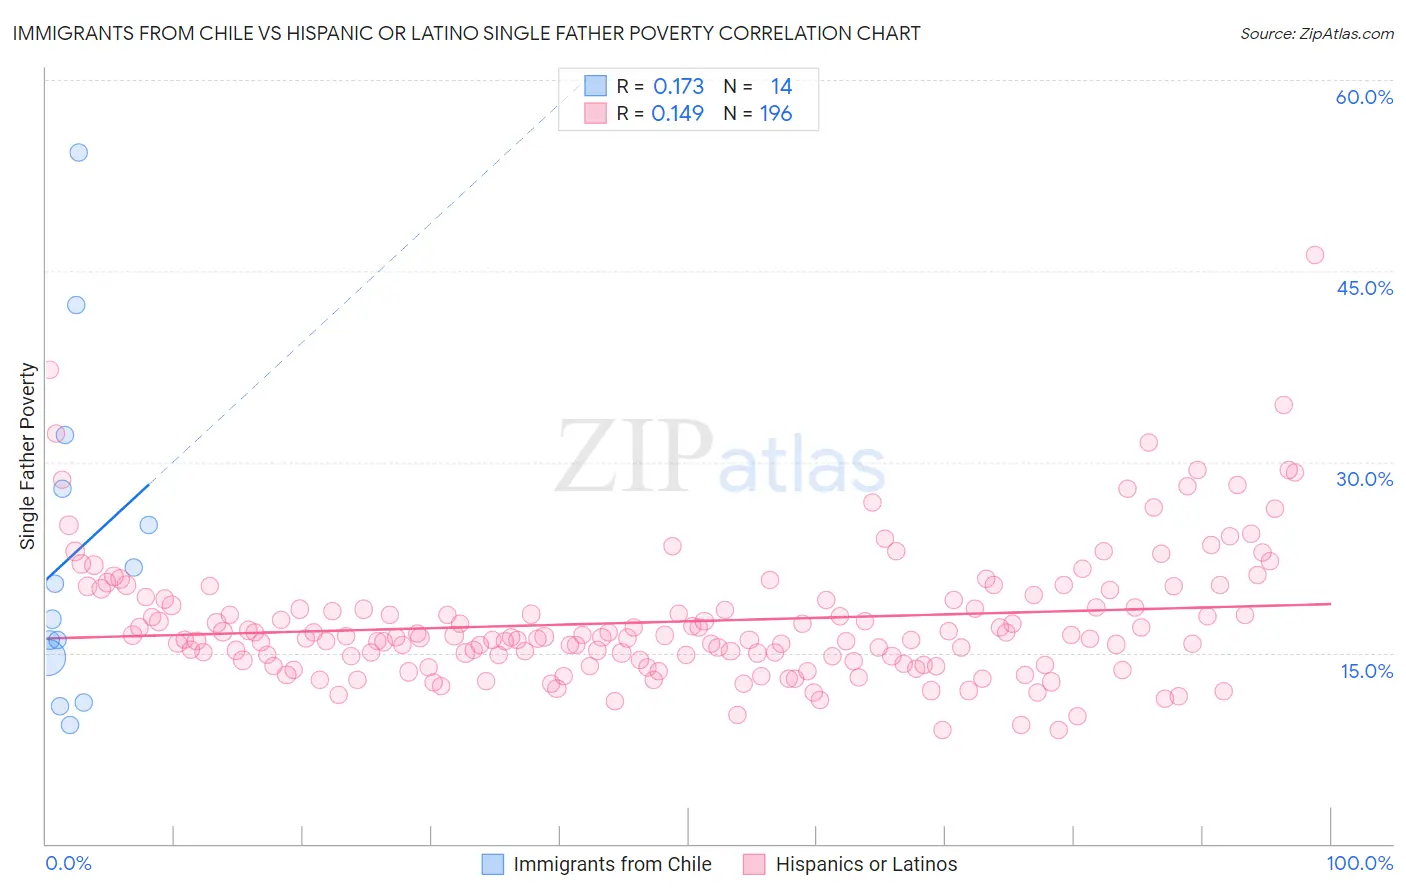 Immigrants from Chile vs Hispanic or Latino Single Father Poverty